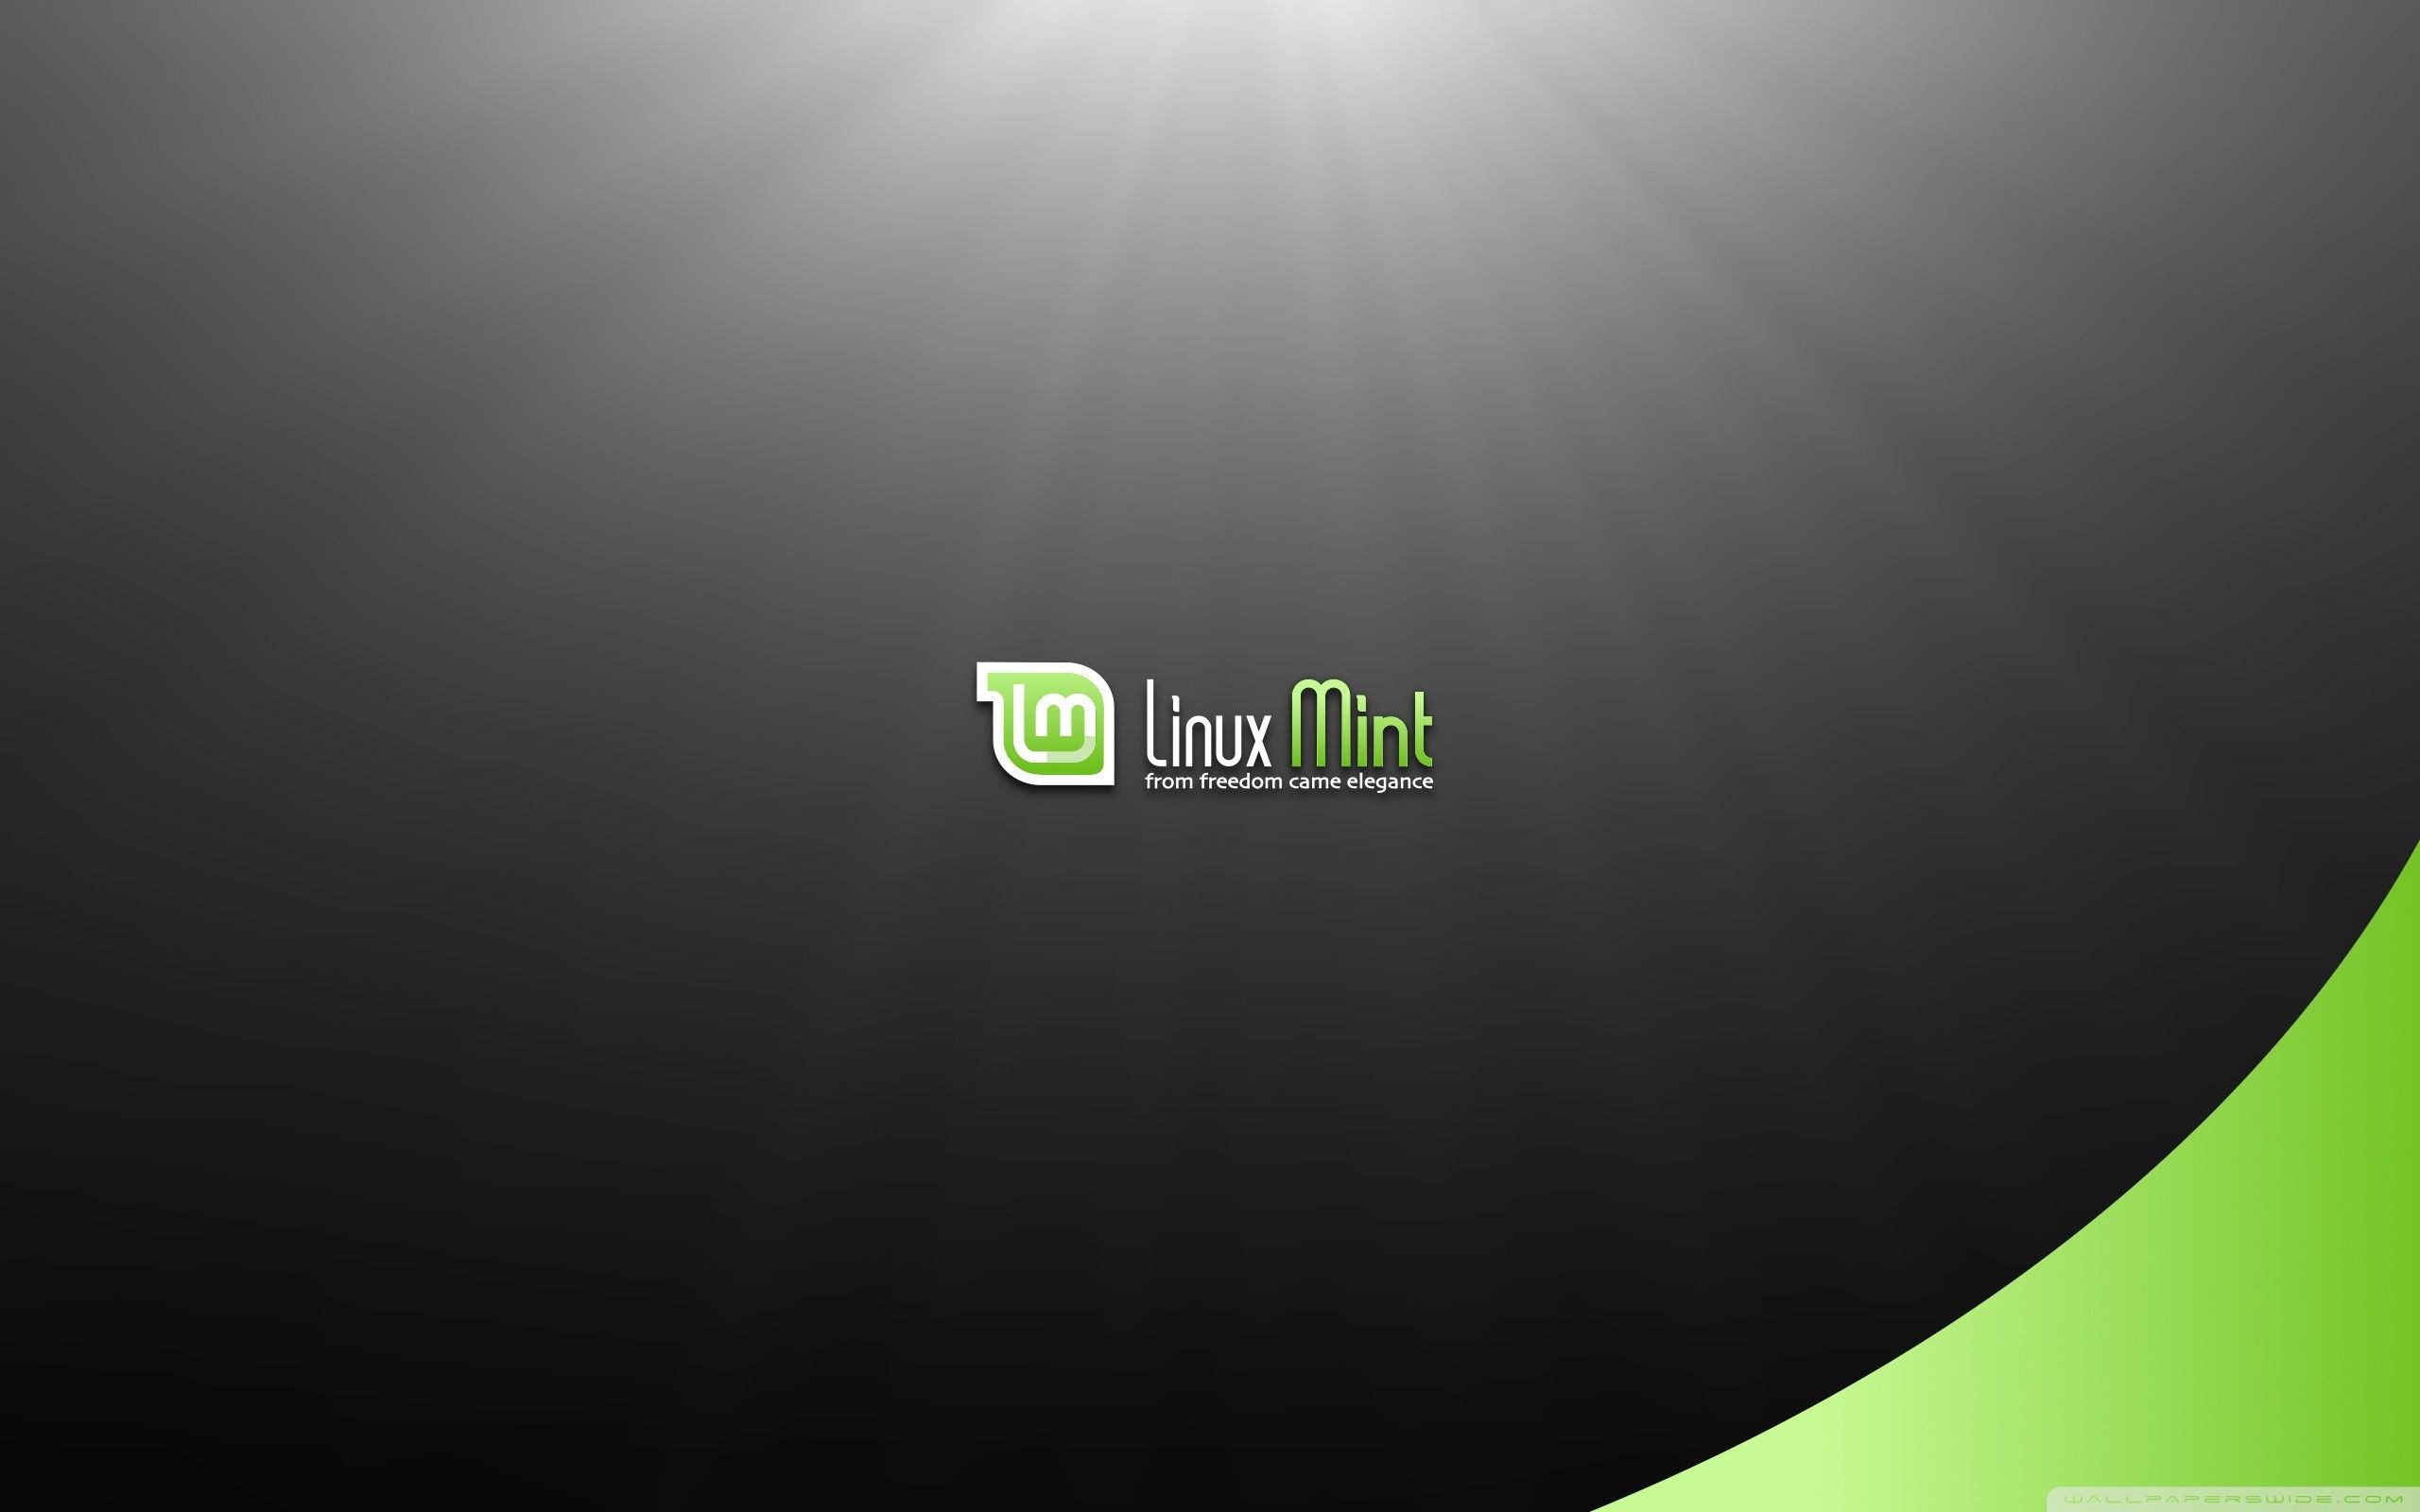 Another Linux Mint Wallpaper  Finished Projects  Blender Artists Community